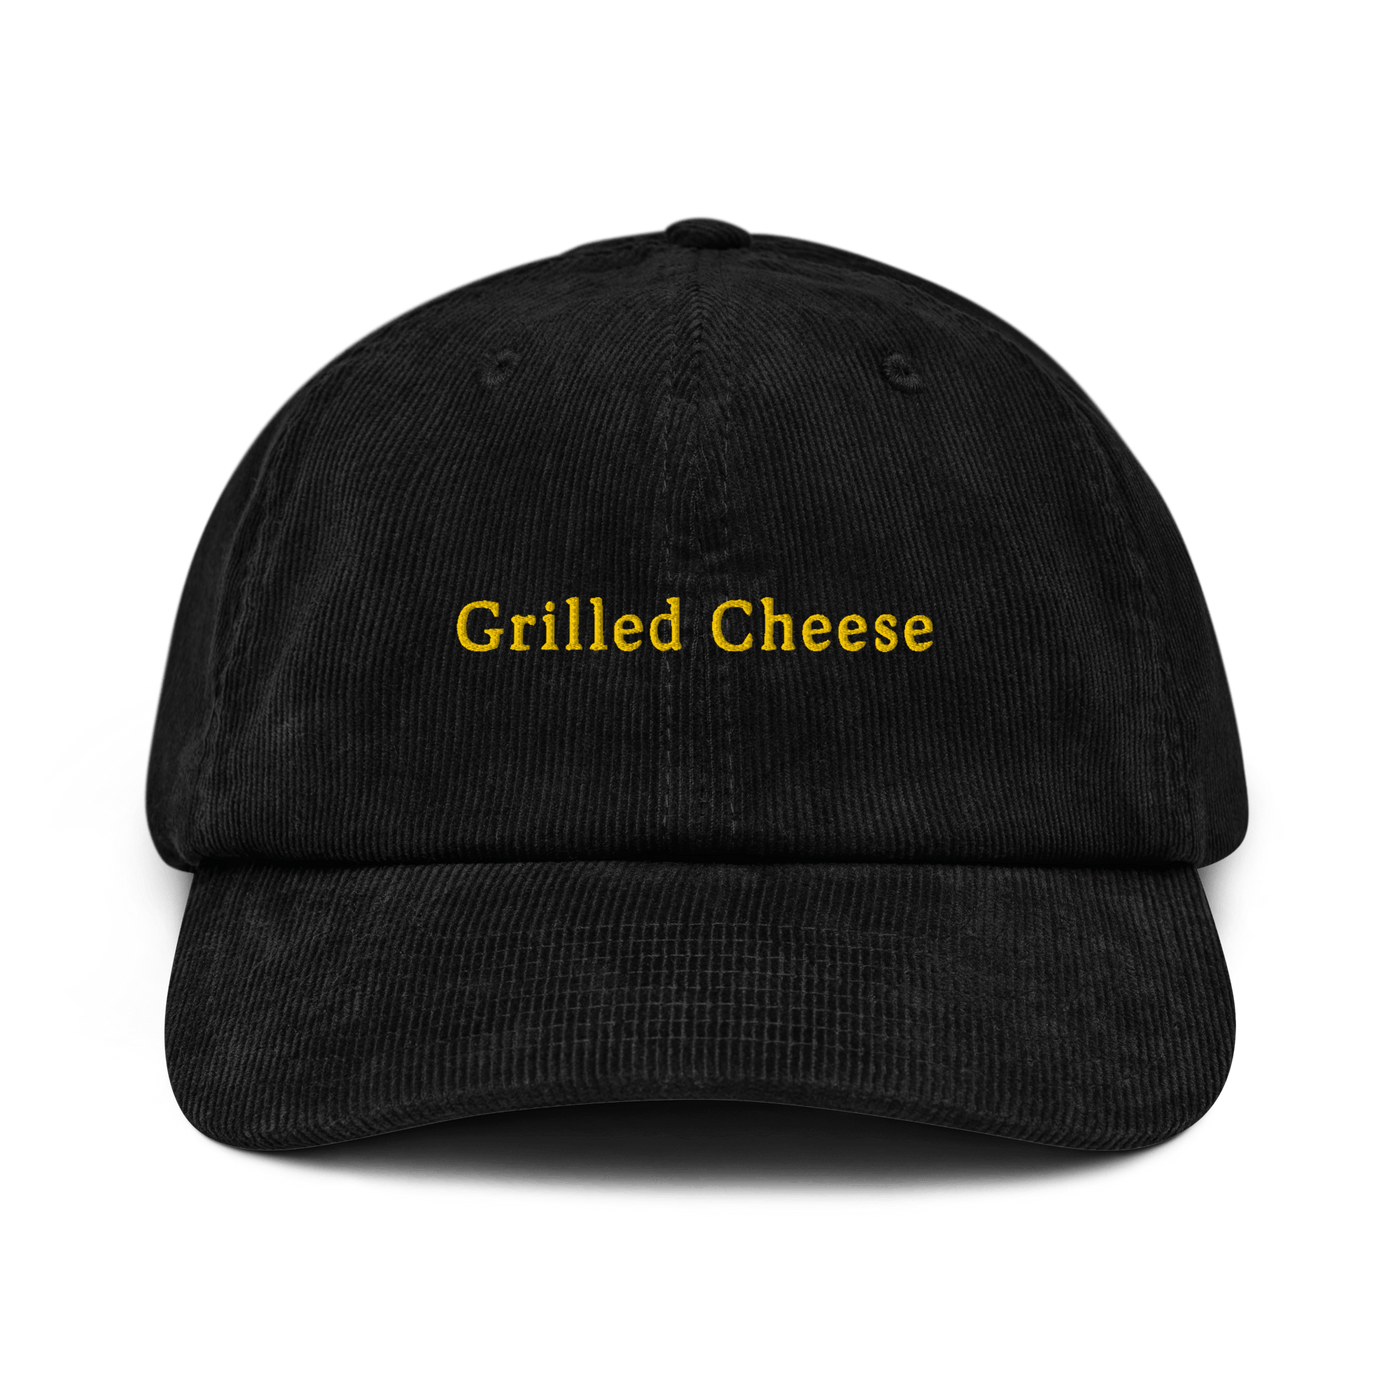 Grilled Cheese Corduroy hat - Black - - Just Another Cap Store